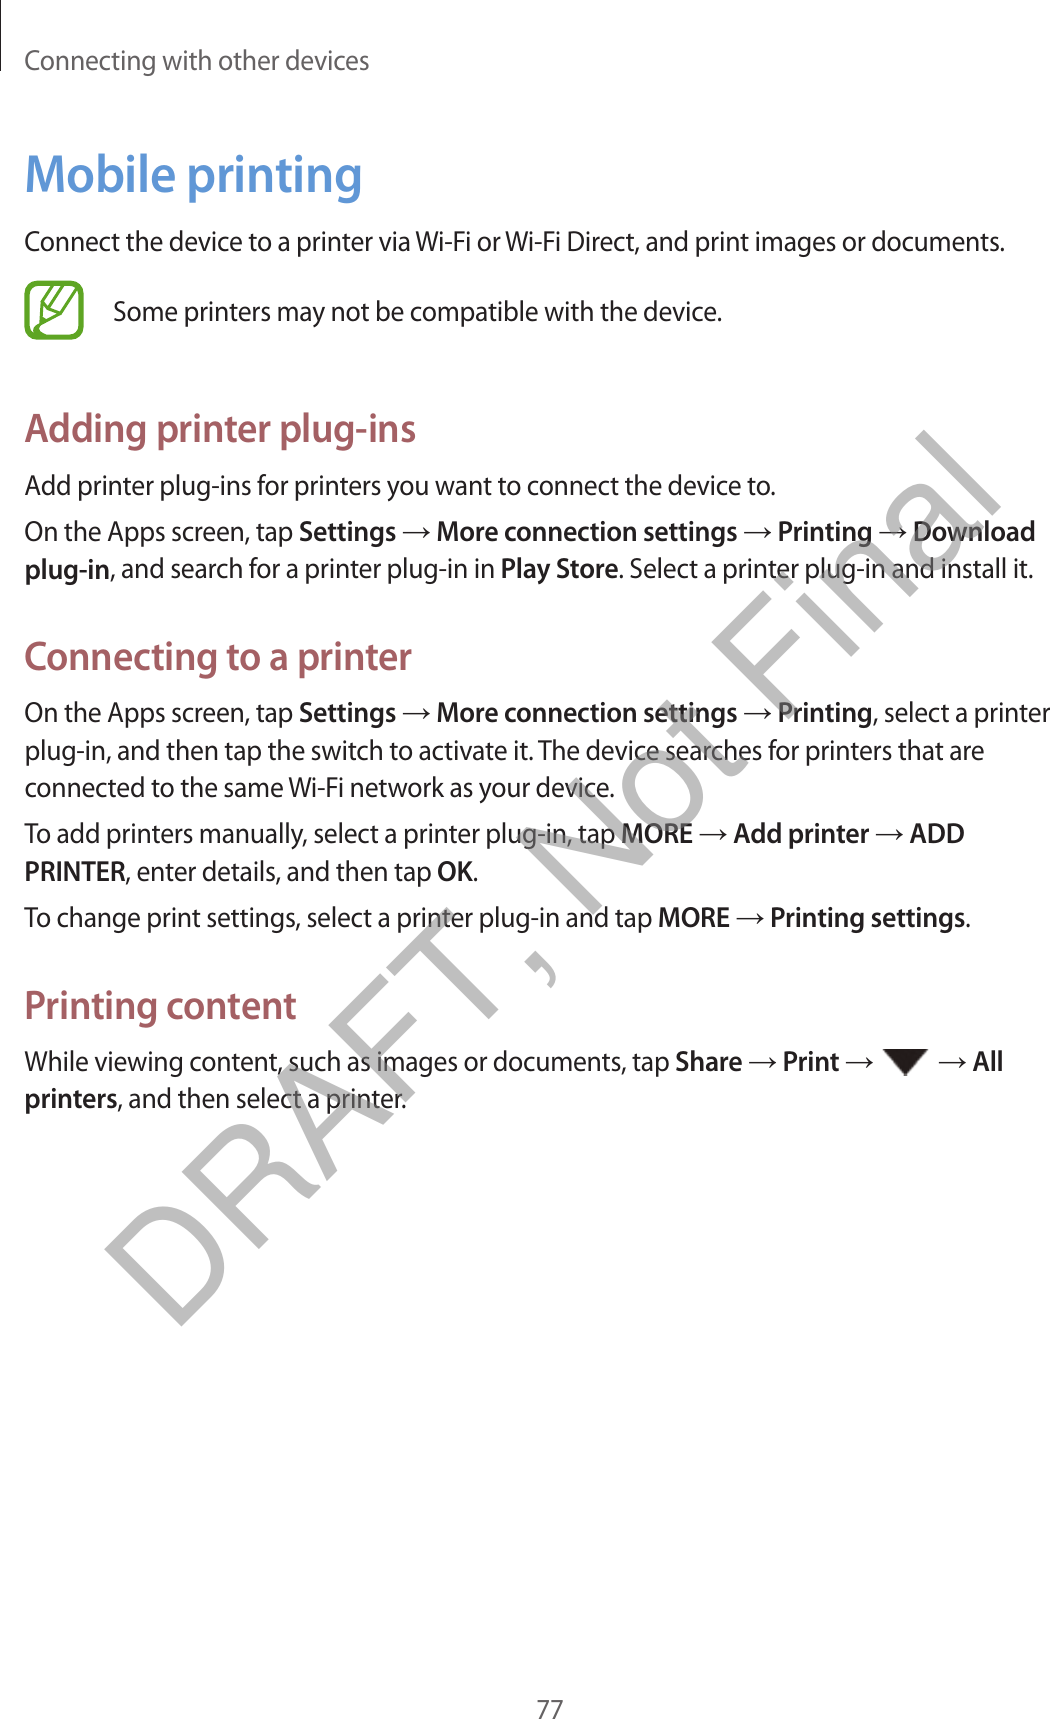 Connecting with other devices77Mobile printingConnect the device to a printer via Wi-Fi or Wi-Fi Direct, and print images or documents.Some printers may not be compatible with the device.Adding printer plug-insAdd printer plug-ins for printers you want to connect the device to.On the Apps screen, tap Settings → More connection settings → Printing → Download plug-in, and search for a printer plug-in in Play Store. Select a printer plug-in and install it.Connecting to a printerOn the Apps screen, tap Settings → More connection settings → Printing, select a printer plug-in, and then tap the switch to activate it. The device searches for printers that are connected to the same Wi-Fi network as your device.To add printers manually, select a printer plug-in, tap MORE → Add printer → ADD PRINTER, enter details, and then tap OK.To change print settings, select a printer plug-in and tap MORE → Printing settings.Printing contentWhile viewing content, such as images or documents, tap Share → Print →   → All printers, and then select a printer.DRAFT, Not Final